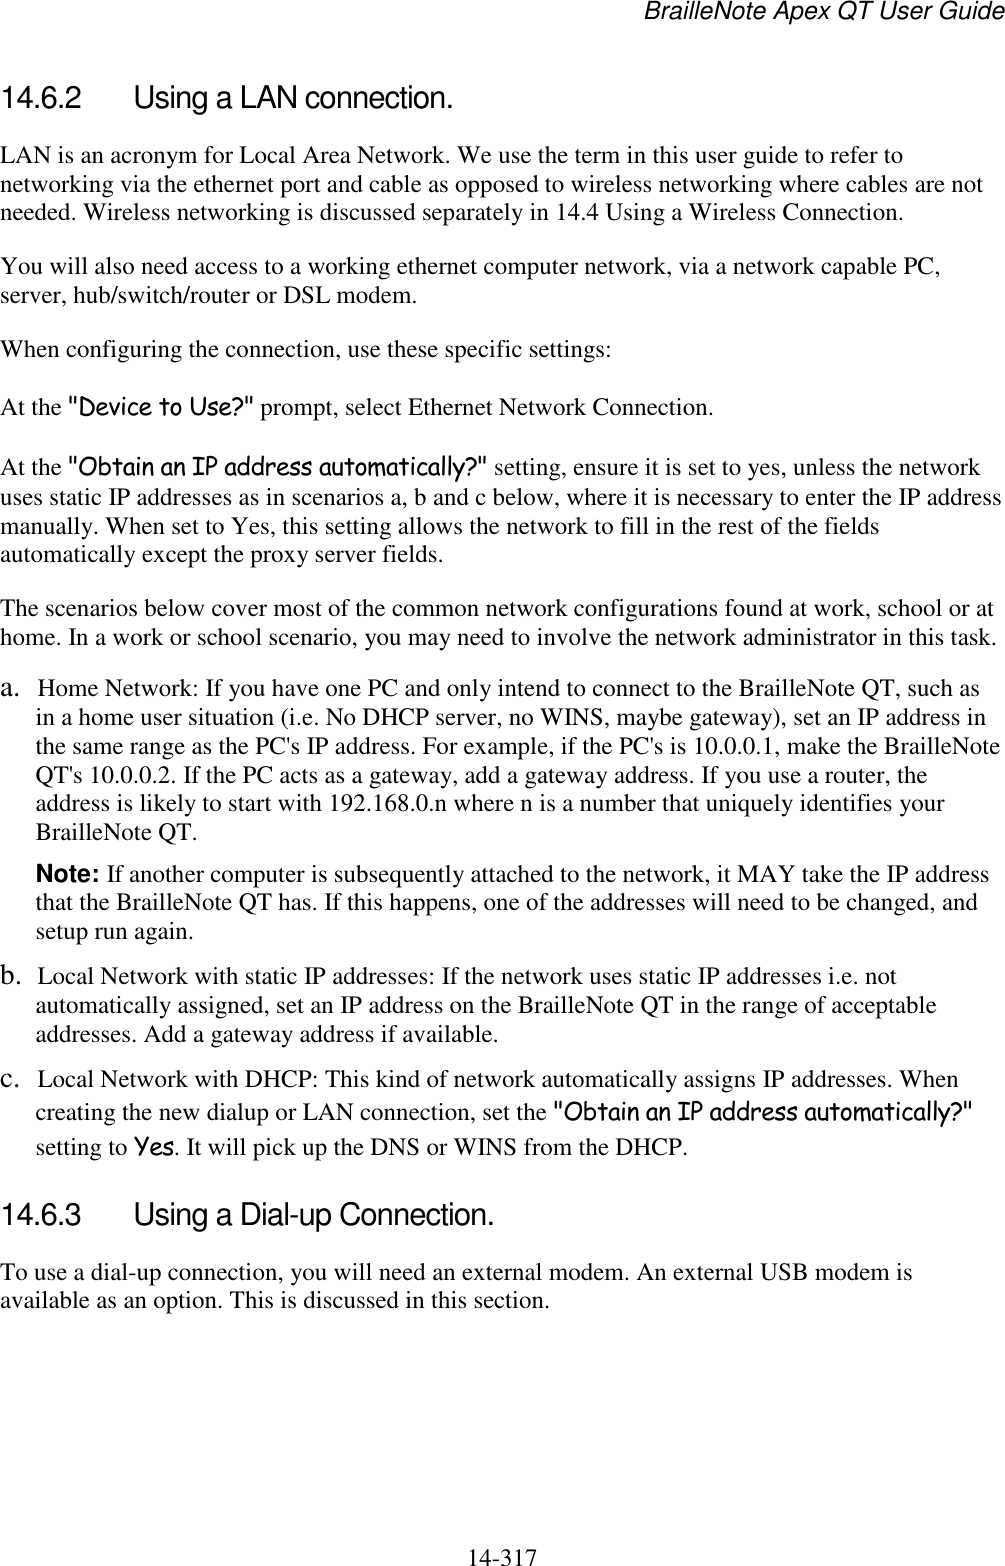 BrailleNote Apex QT User Guide  14-317   14.6.2  Using a LAN connection. LAN is an acronym for Local Area Network. We use the term in this user guide to refer to networking via the ethernet port and cable as opposed to wireless networking where cables are not needed. Wireless networking is discussed separately in 14.4 Using a Wireless Connection. You will also need access to a working ethernet computer network, via a network capable PC, server, hub/switch/router or DSL modem. When configuring the connection, use these specific settings: At the &quot;Device to Use?&quot; prompt, select Ethernet Network Connection. At the &quot;Obtain an IP address automatically?&quot; setting, ensure it is set to yes, unless the network uses static IP addresses as in scenarios a, b and c below, where it is necessary to enter the IP address manually. When set to Yes, this setting allows the network to fill in the rest of the fields automatically except the proxy server fields. The scenarios below cover most of the common network configurations found at work, school or at home. In a work or school scenario, you may need to involve the network administrator in this task. a. Home Network: If you have one PC and only intend to connect to the BrailleNote QT, such as in a home user situation (i.e. No DHCP server, no WINS, maybe gateway), set an IP address in the same range as the PC&apos;s IP address. For example, if the PC&apos;s is 10.0.0.1, make the BrailleNote QT&apos;s 10.0.0.2. If the PC acts as a gateway, add a gateway address. If you use a router, the address is likely to start with 192.168.0.n where n is a number that uniquely identifies your BrailleNote QT. Note: If another computer is subsequently attached to the network, it MAY take the IP address that the BrailleNote QT has. If this happens, one of the addresses will need to be changed, and setup run again. b. Local Network with static IP addresses: If the network uses static IP addresses i.e. not automatically assigned, set an IP address on the BrailleNote QT in the range of acceptable addresses. Add a gateway address if available. c. Local Network with DHCP: This kind of network automatically assigns IP addresses. When creating the new dialup or LAN connection, set the &quot;Obtain an IP address automatically?&quot; setting to Yes. It will pick up the DNS or WINS from the DHCP.  14.6.3  Using a Dial-up Connection. To use a dial-up connection, you will need an external modem. An external USB modem is available as an option. This is discussed in this section.   